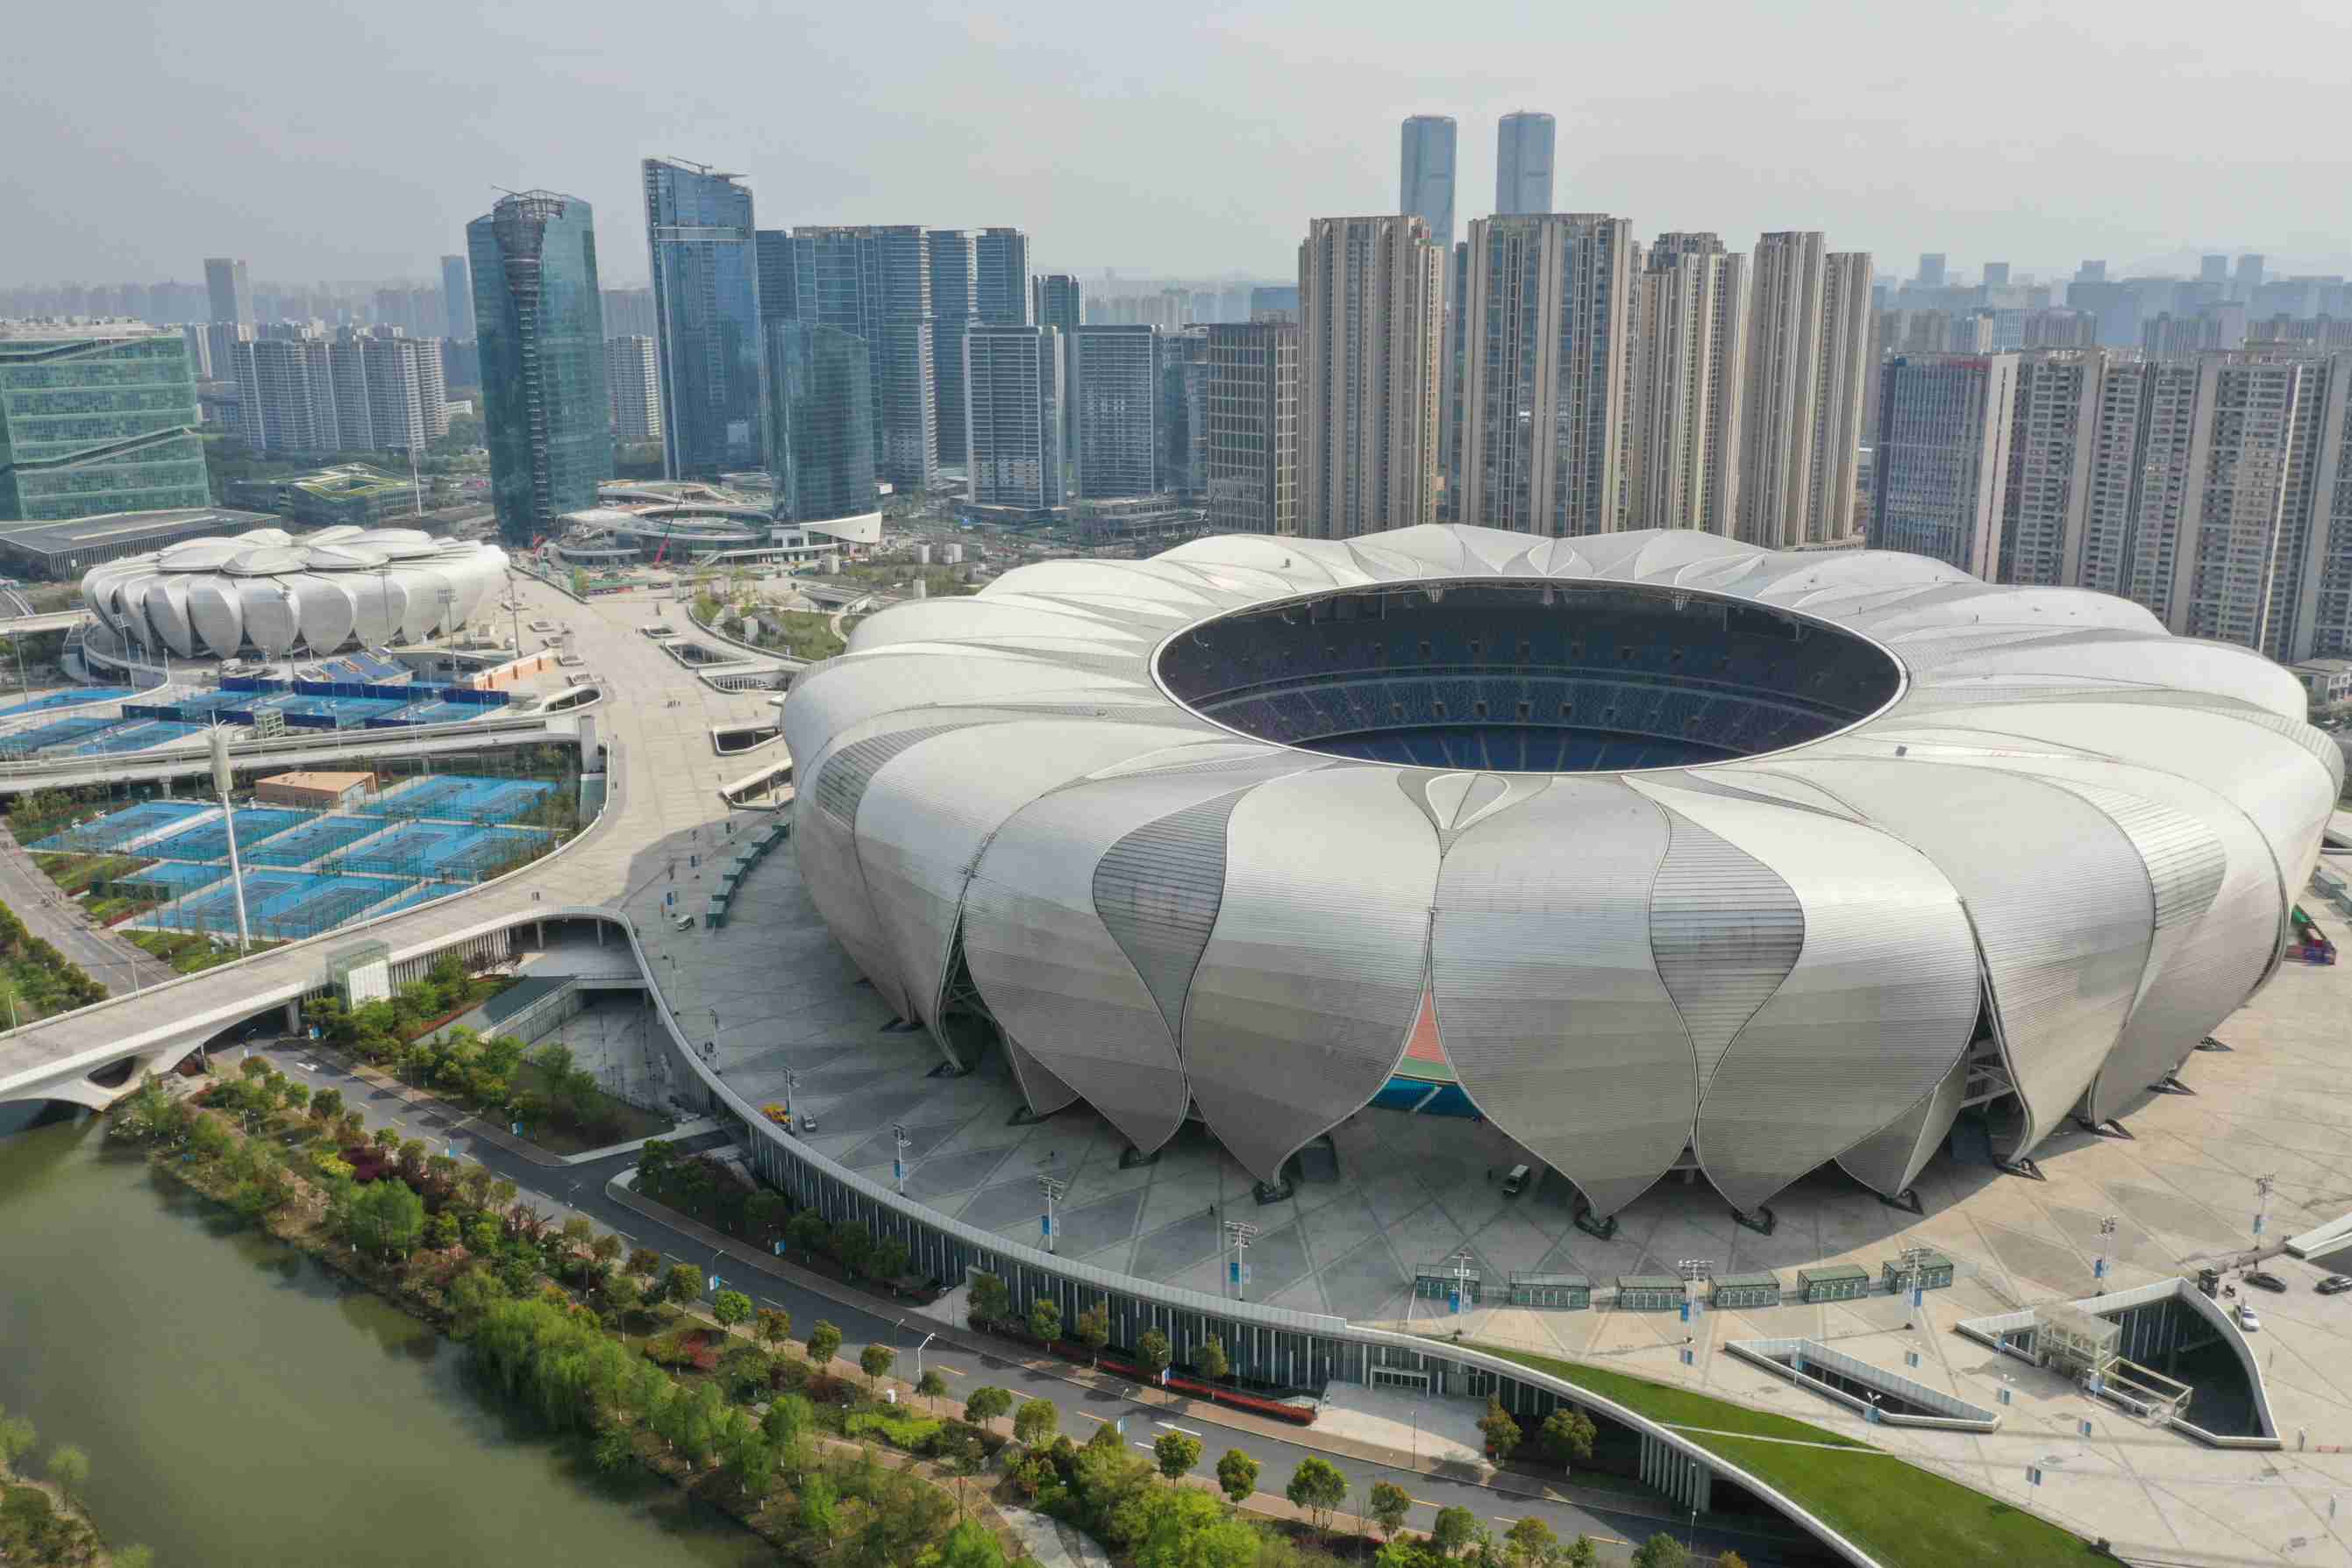 The surging Asia - written on the occasion of the opening of the 19th Asian Games, as the tide of the Hangzhou Asian Games rises over the Qiantang River